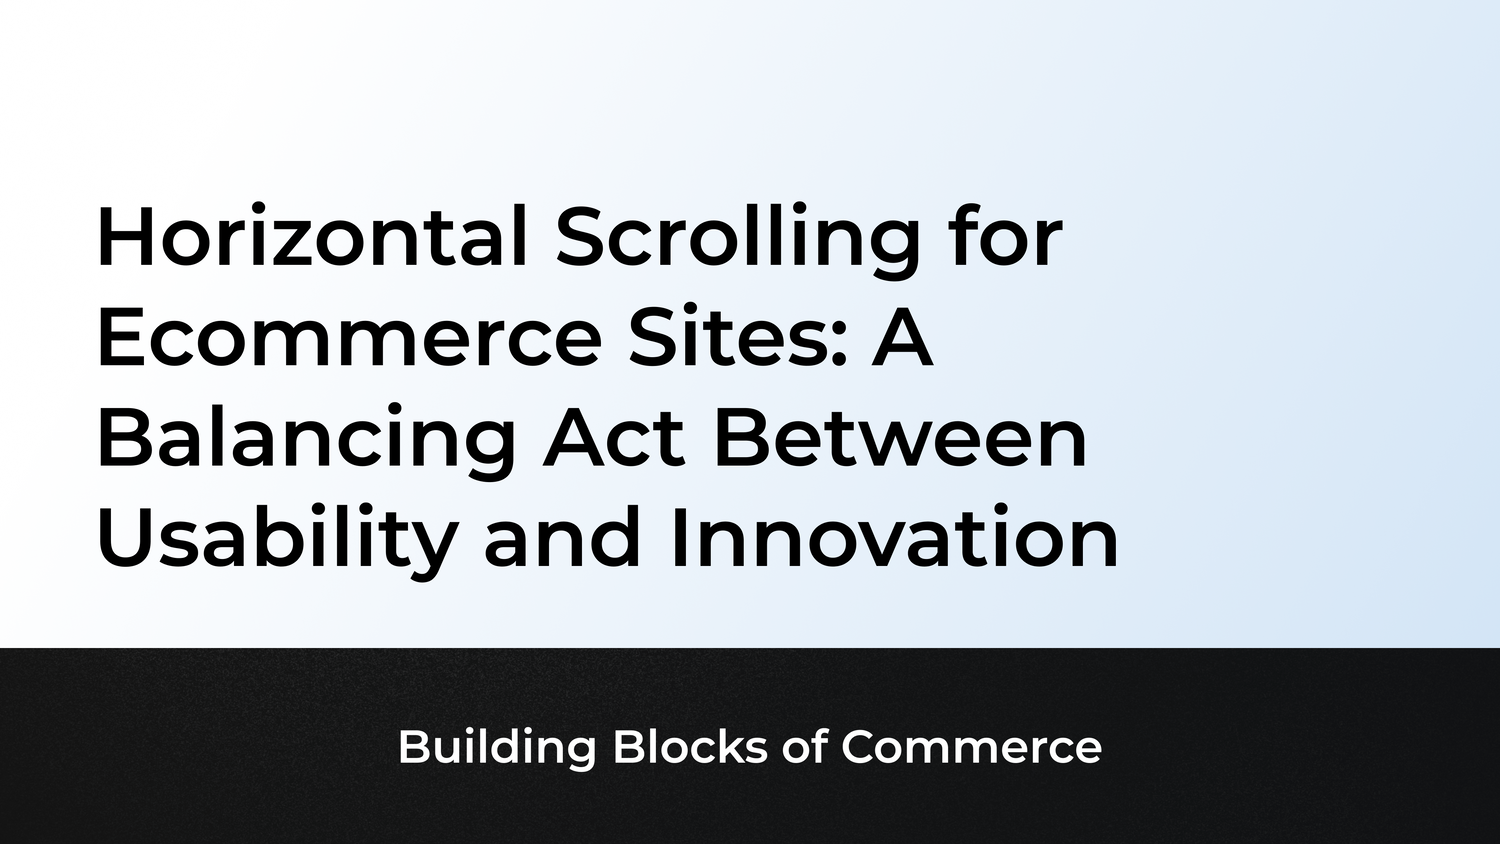 Horizontal Scrolling for Ecommerce Sites: A Balancing Act Between Usability and Innovation